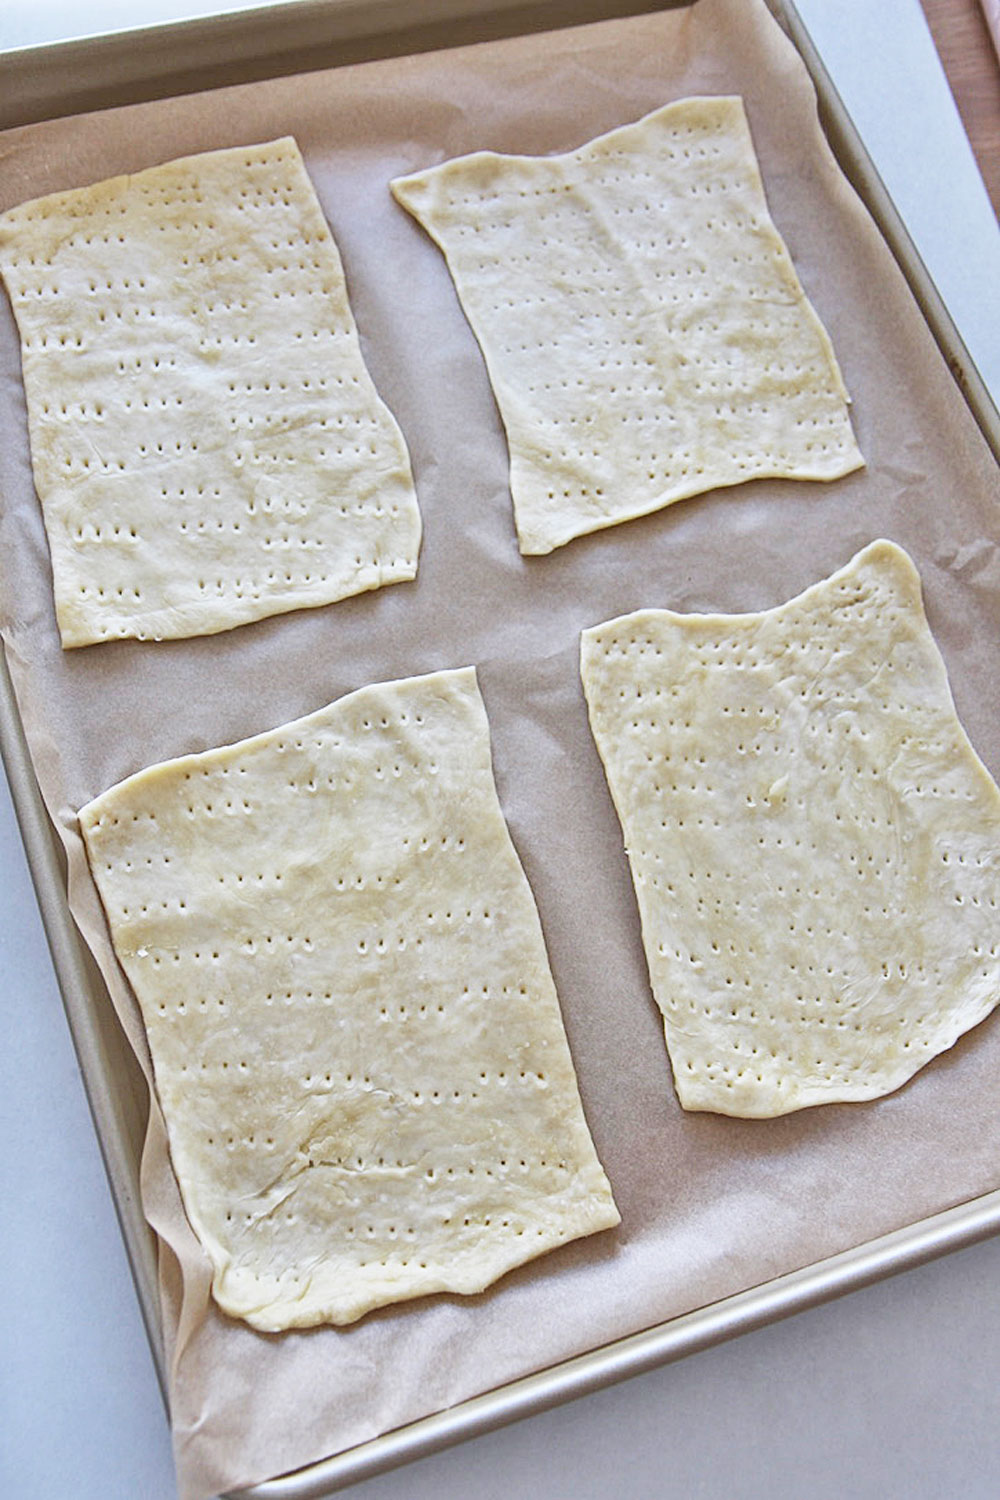 How to Make Matzah at Home.Homemade matzo is so easy because uses pantry ingredients, tastes bakery fresh, and its in honor of my moms Passover Seder! Happy Passover! www.ChopHappy.com #Passoverrecipes #matzorecipe